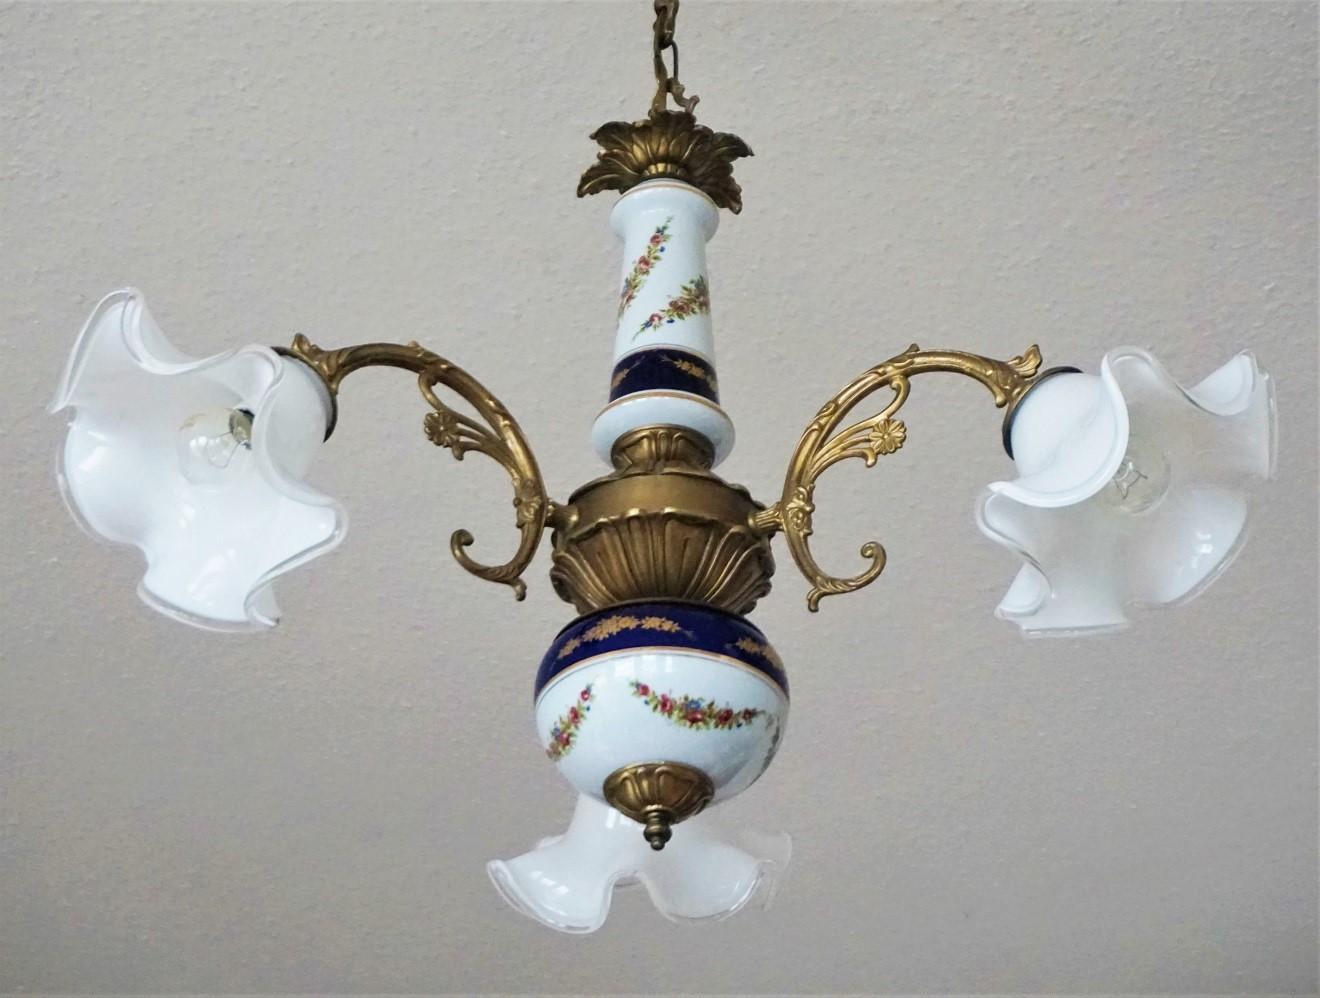 Vintage Limoges porcelain and burnished brass chandelier, three curved arm with large Murano glass shades, France, 1950s. White and cobalt blue hand painted porcelain with floral motifs and gilded decor.
Very good condition: Rewired, on porcelain